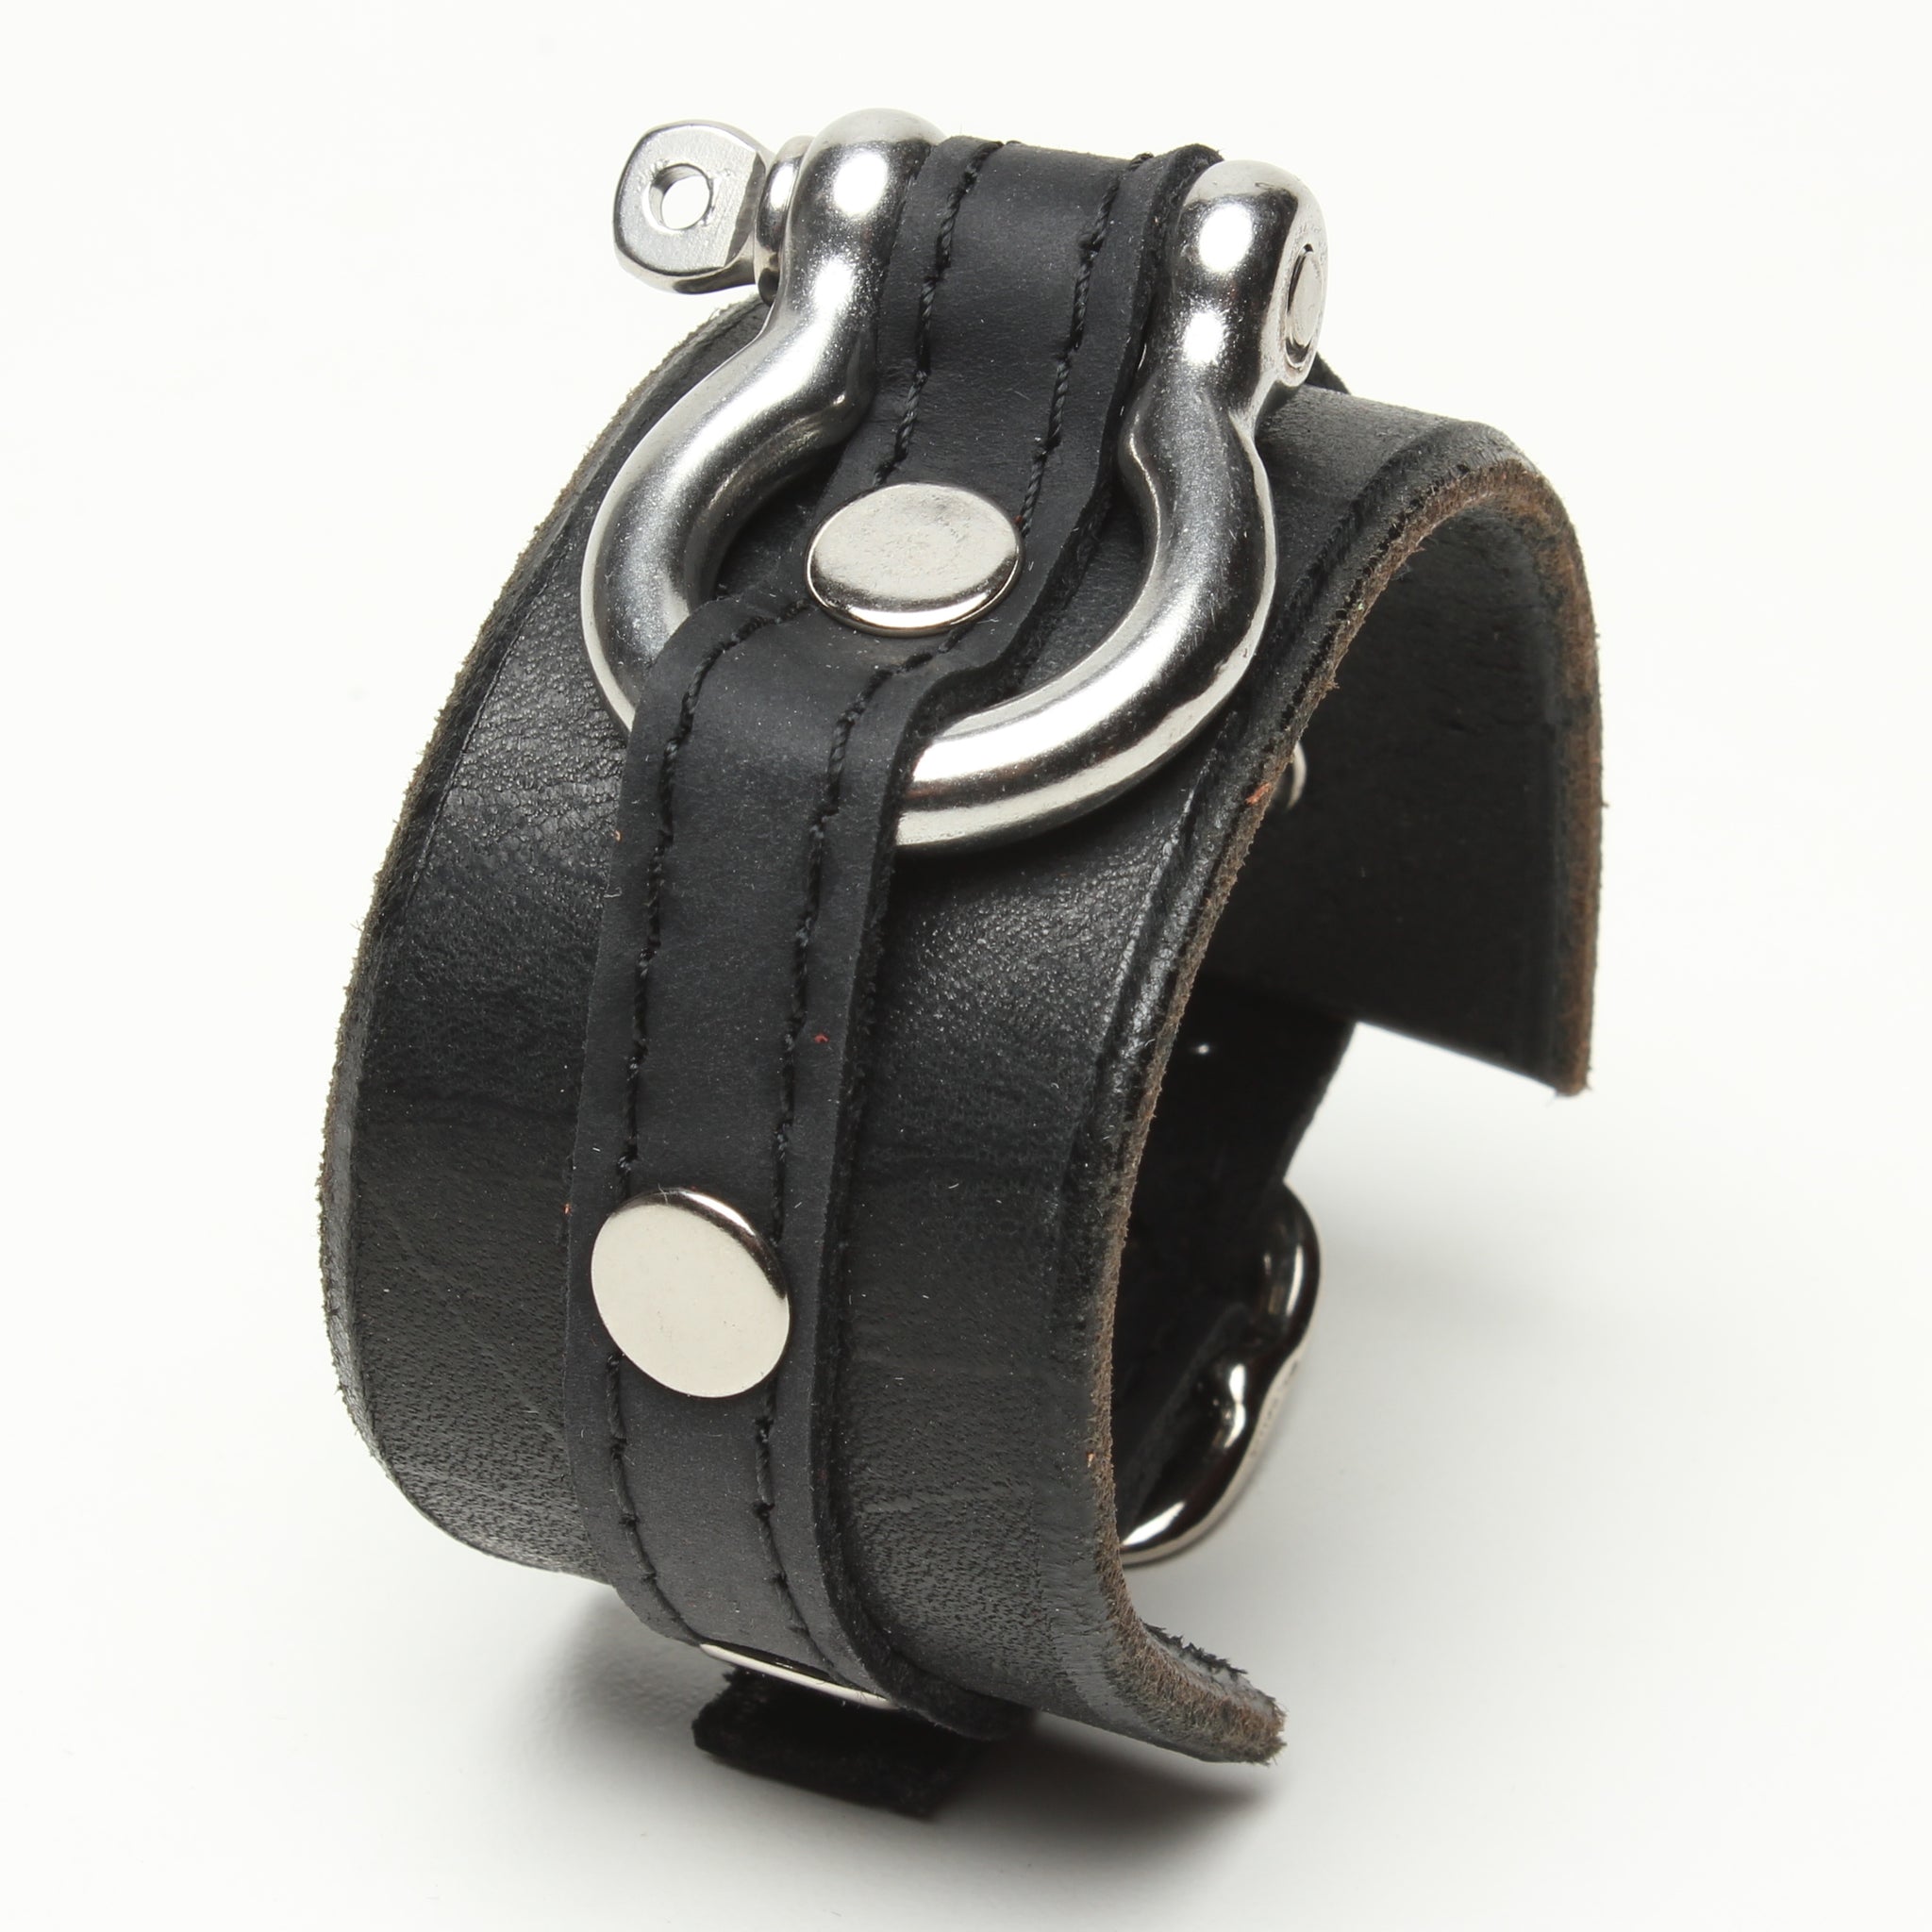 LATIGO LEATHER CUFF WITH ANCHOR SHACKLE by nyet jewelry.